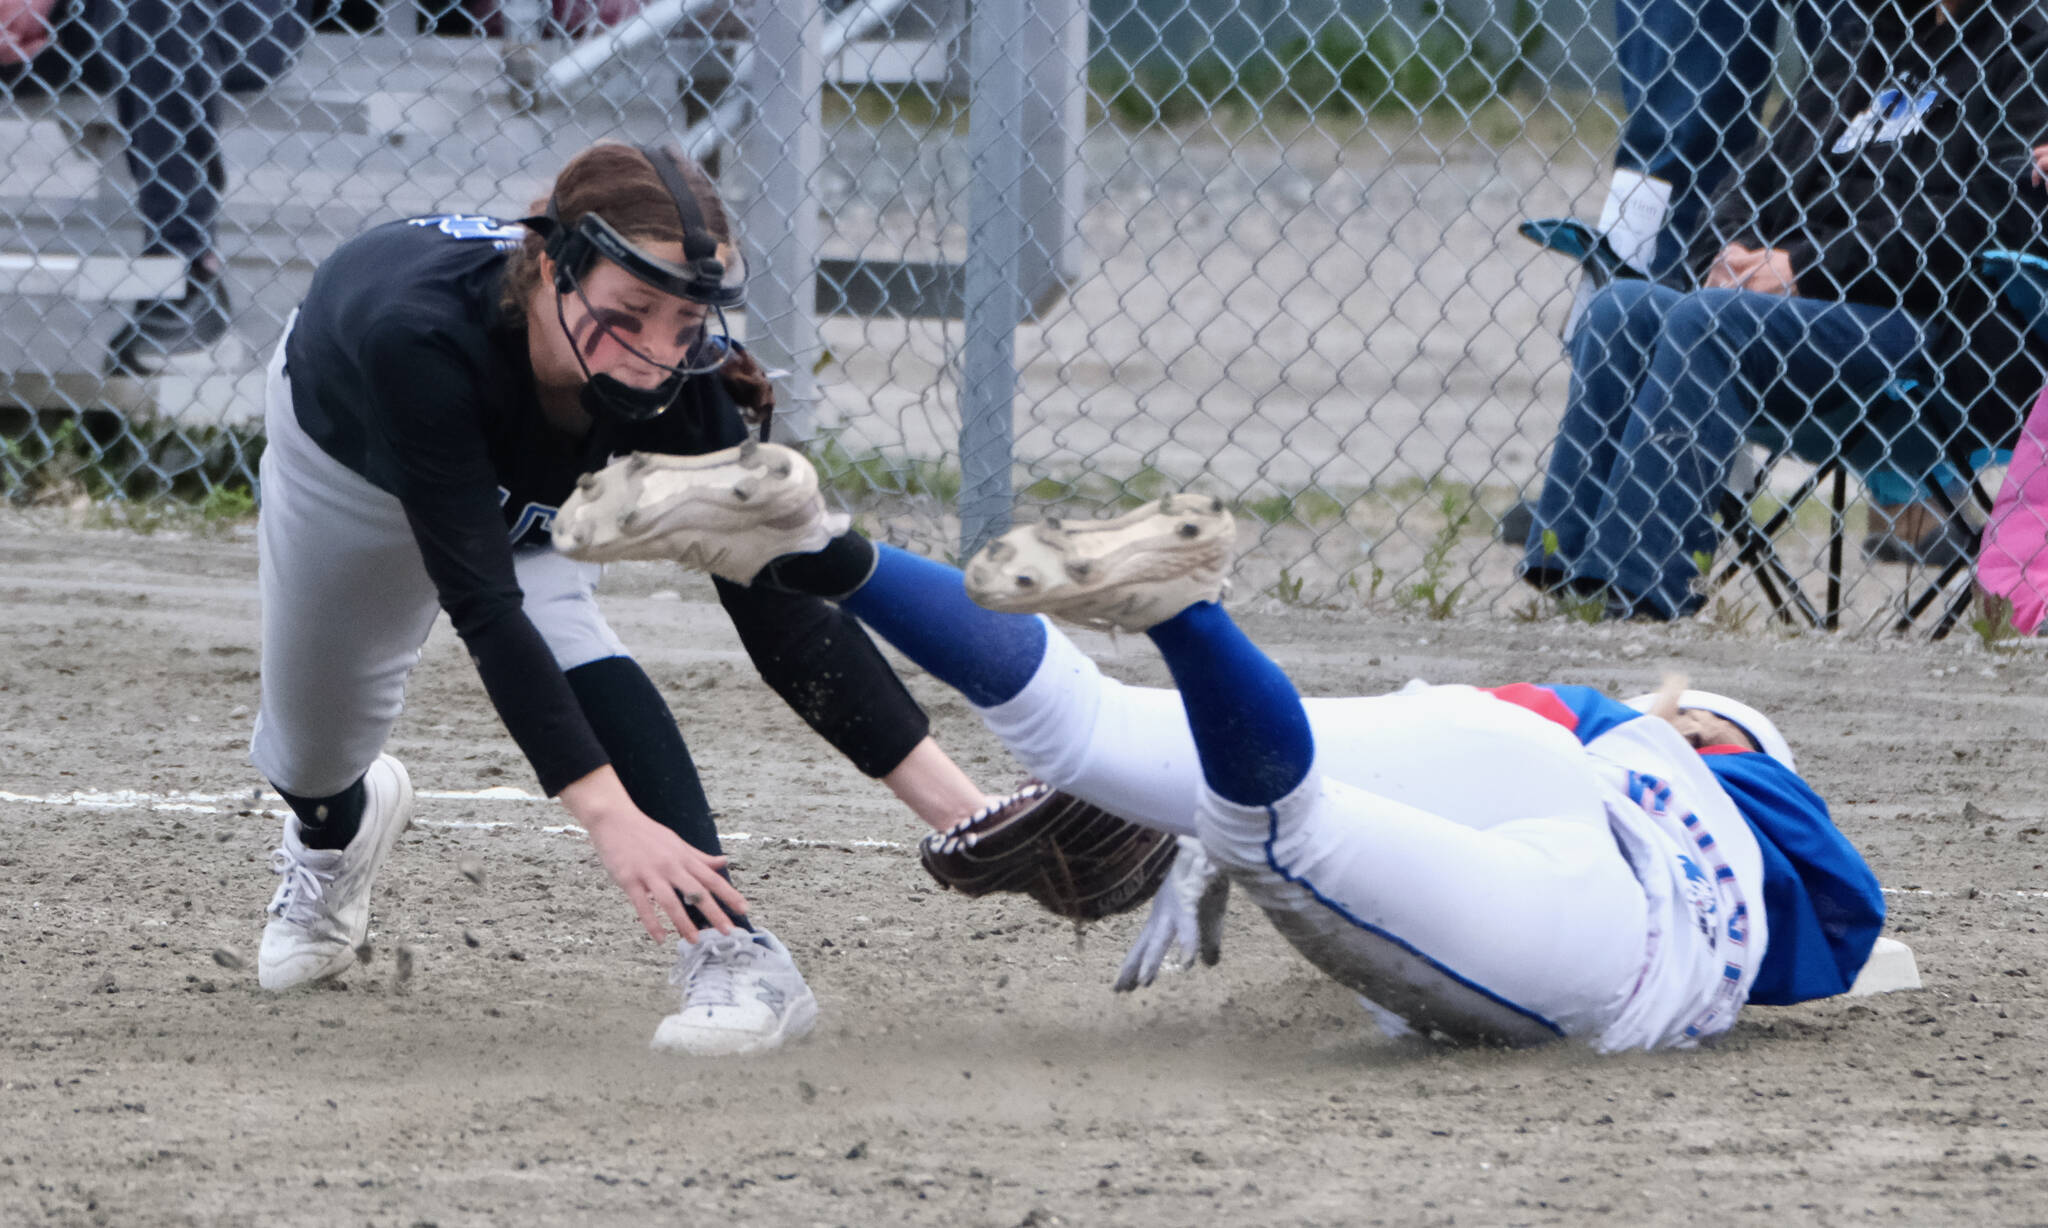 Thunder Mountain freshman third baseman Cambry Lockhart tags out Sitka base runner Adriana Denkiner during the Falcons 11-3 win over the Lady Wolves, Thursday, at Dimond Park. (Klas Stolpe / Juneau Empire)